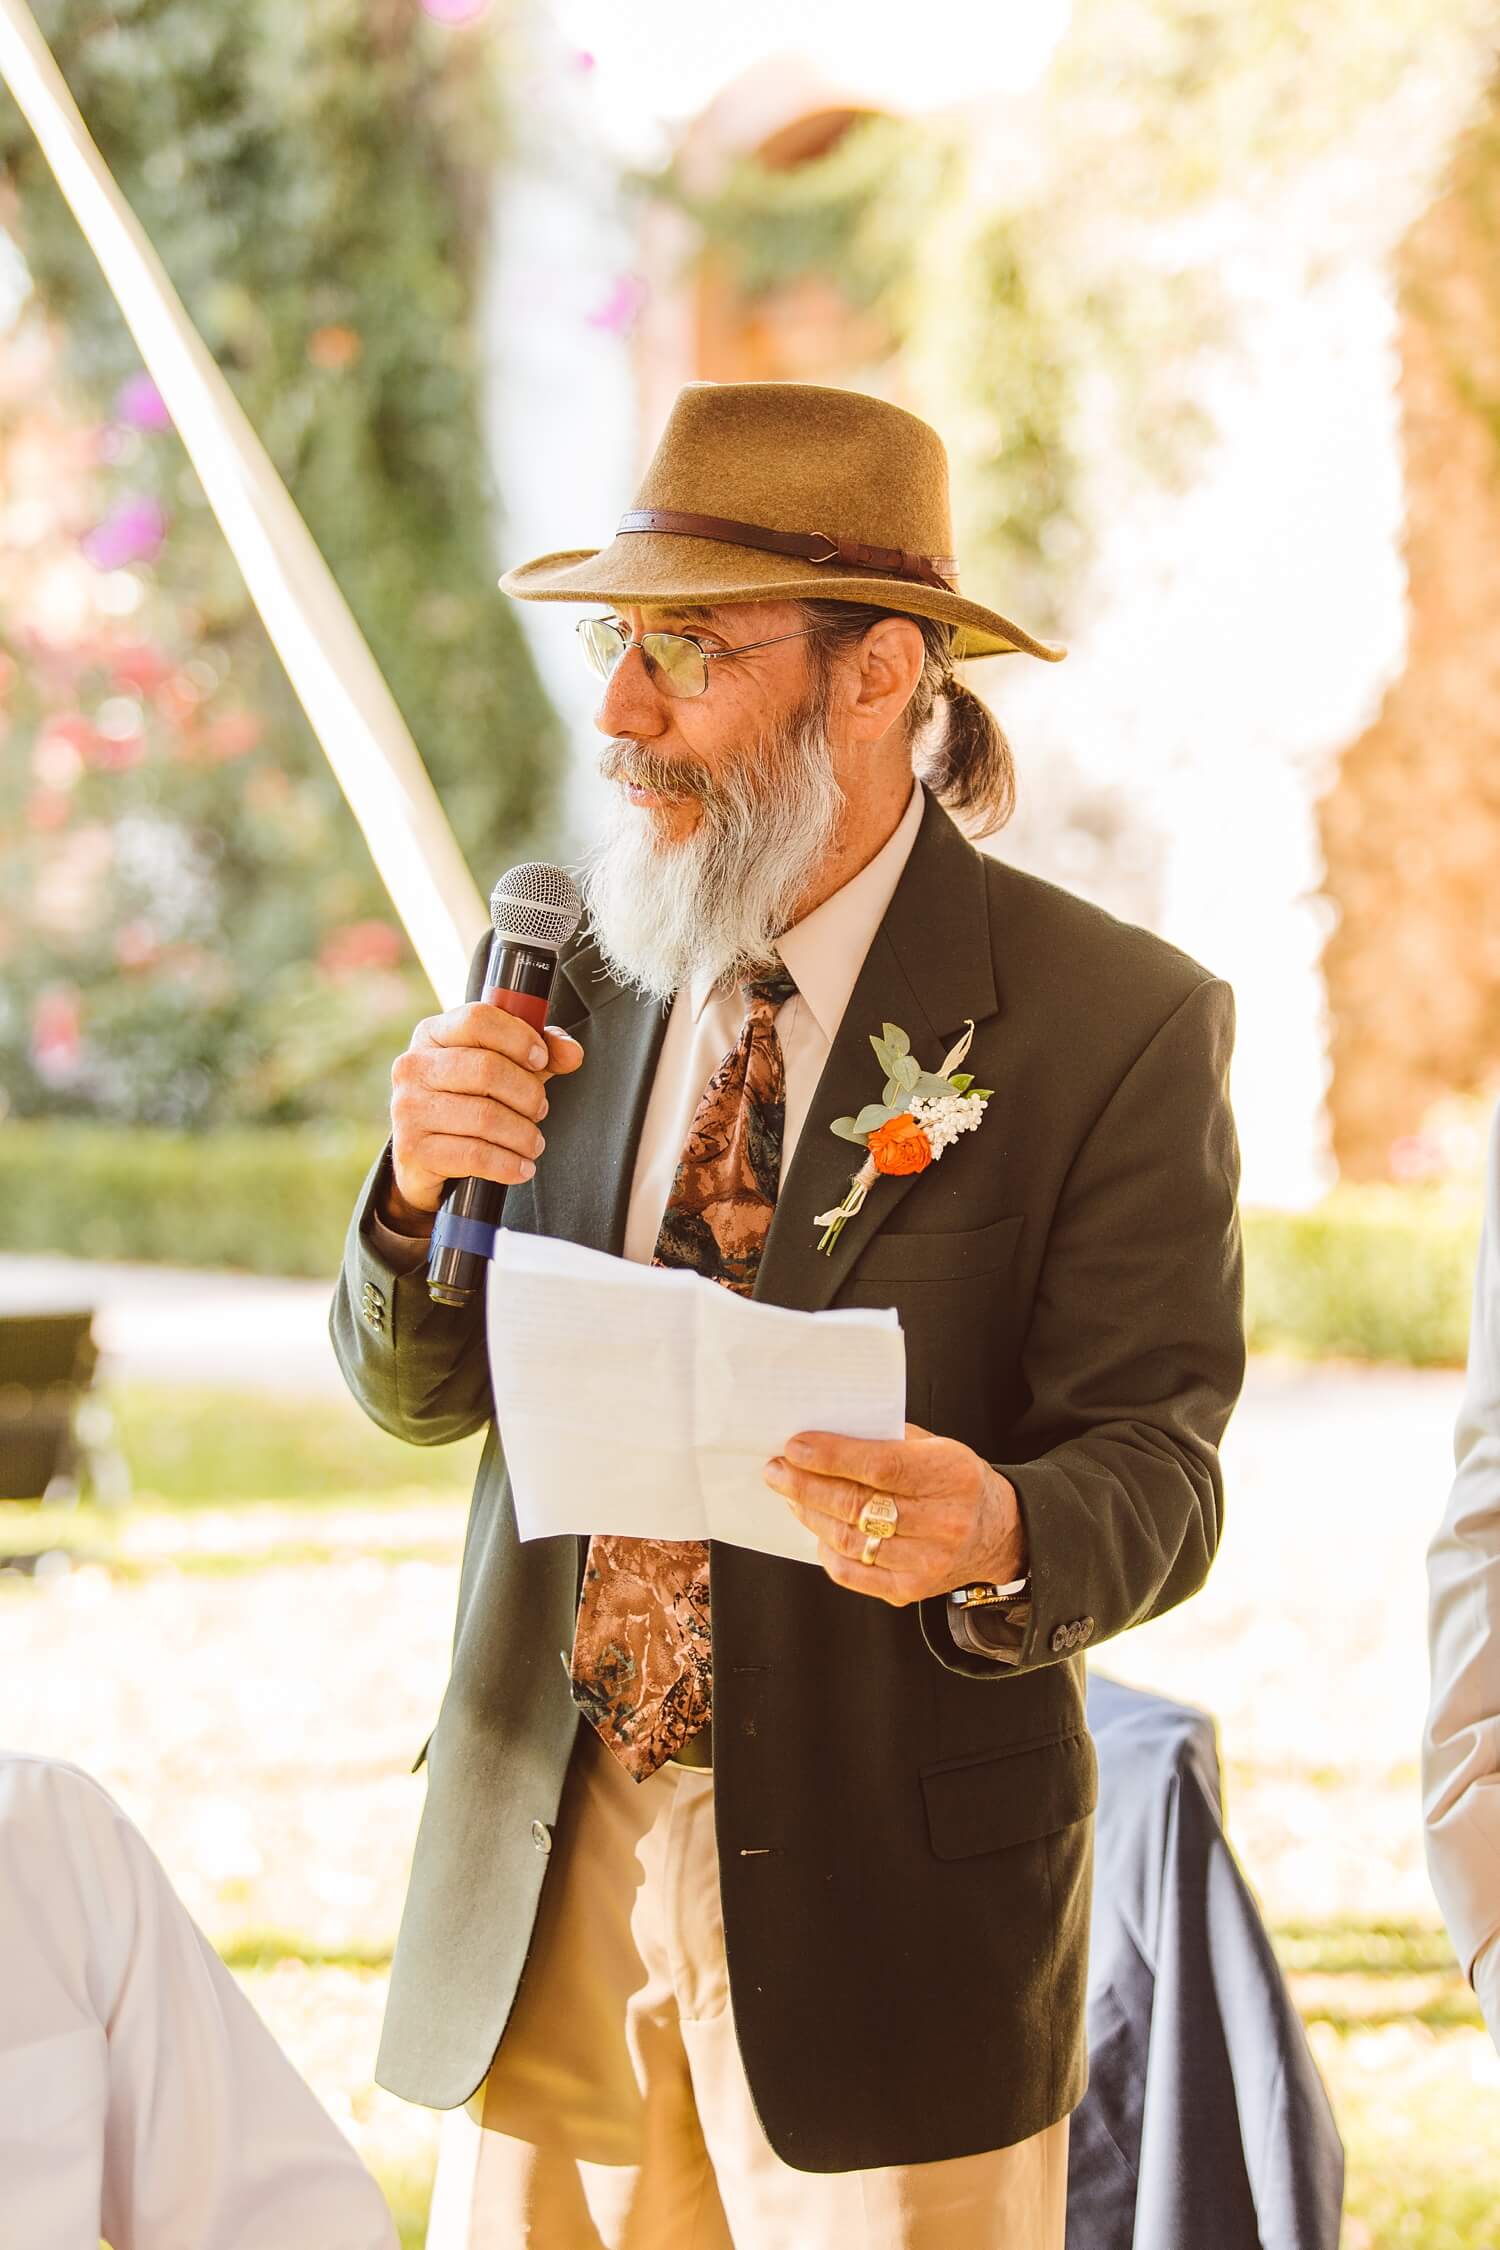 Father giving toast during wedding at Mexico destination wedding | Brooke Michelle Photo